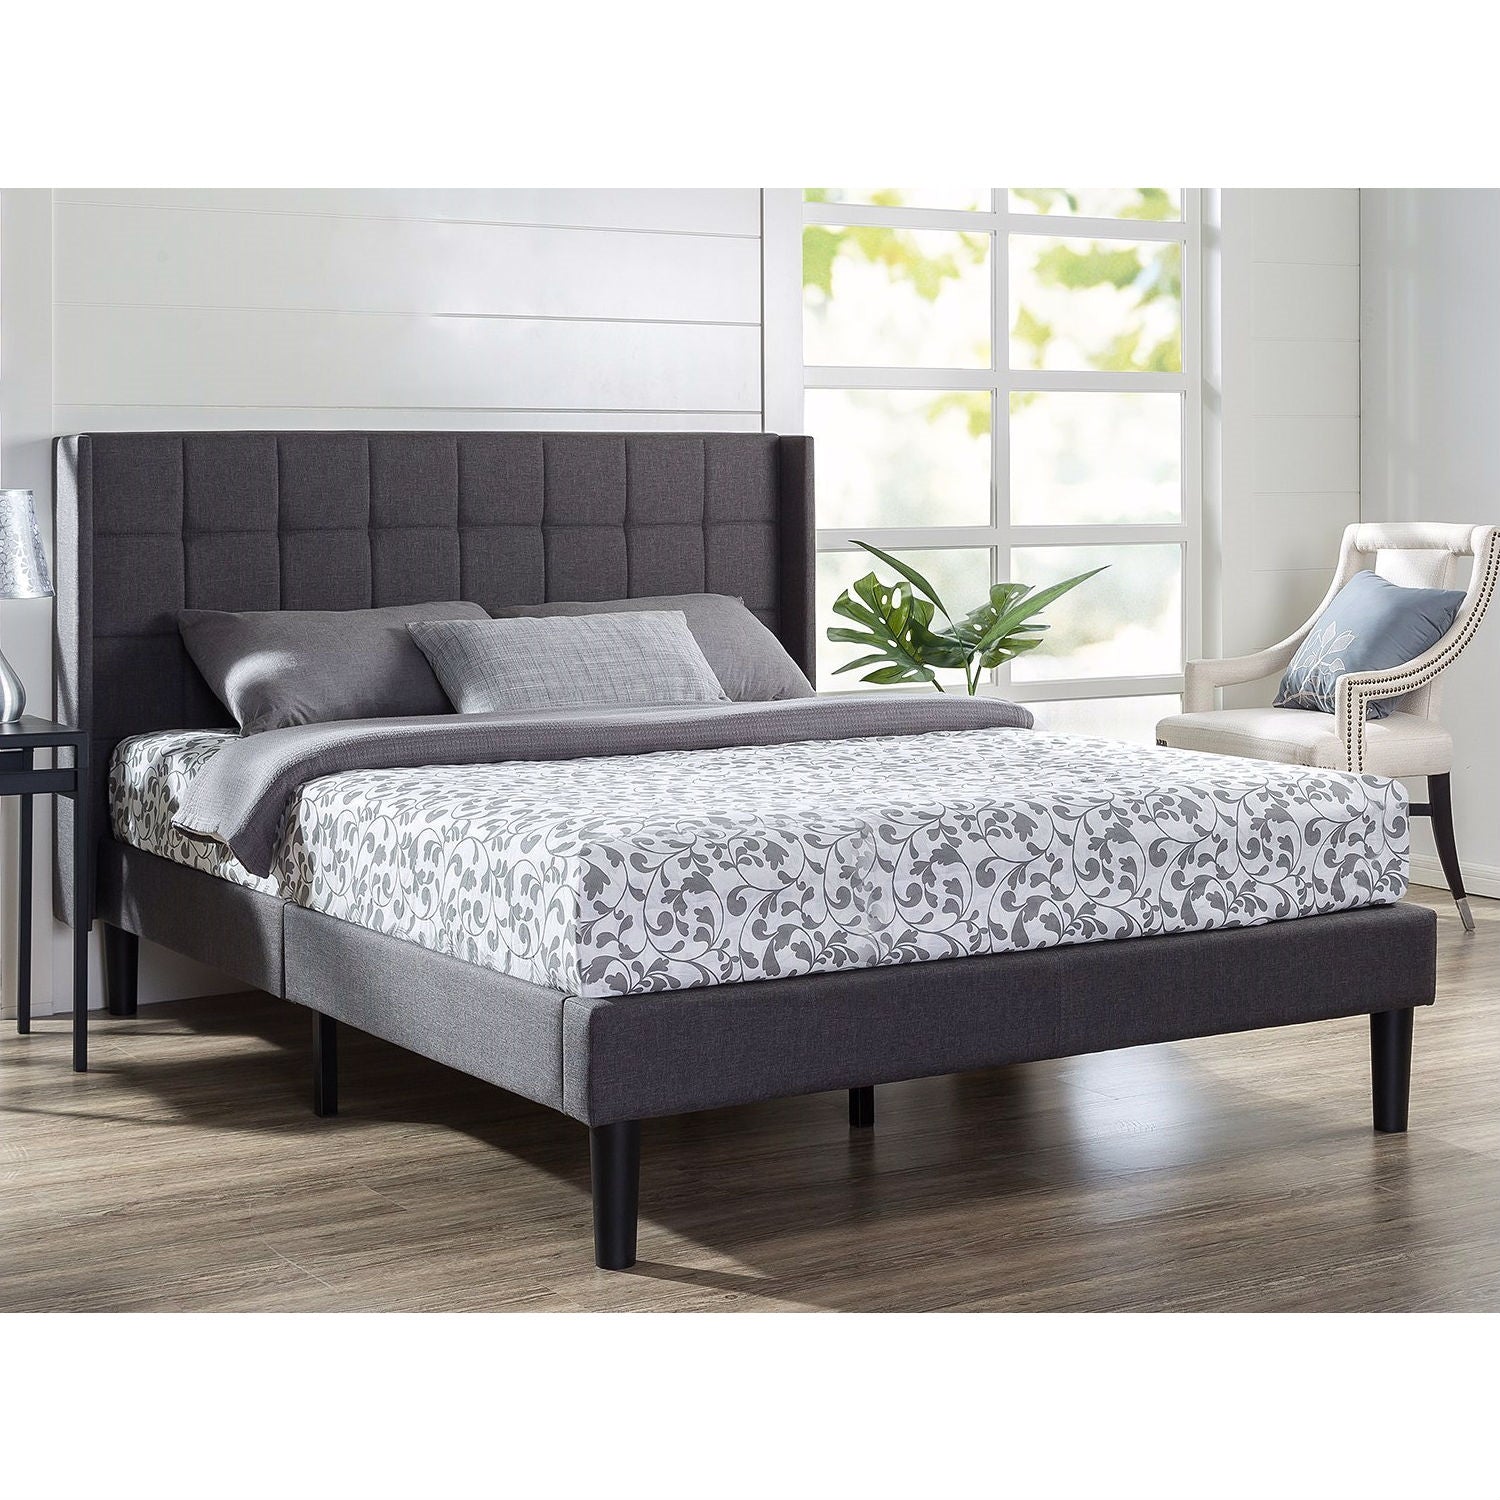 Queen size Grey Wingback Upholstered Platform Bed